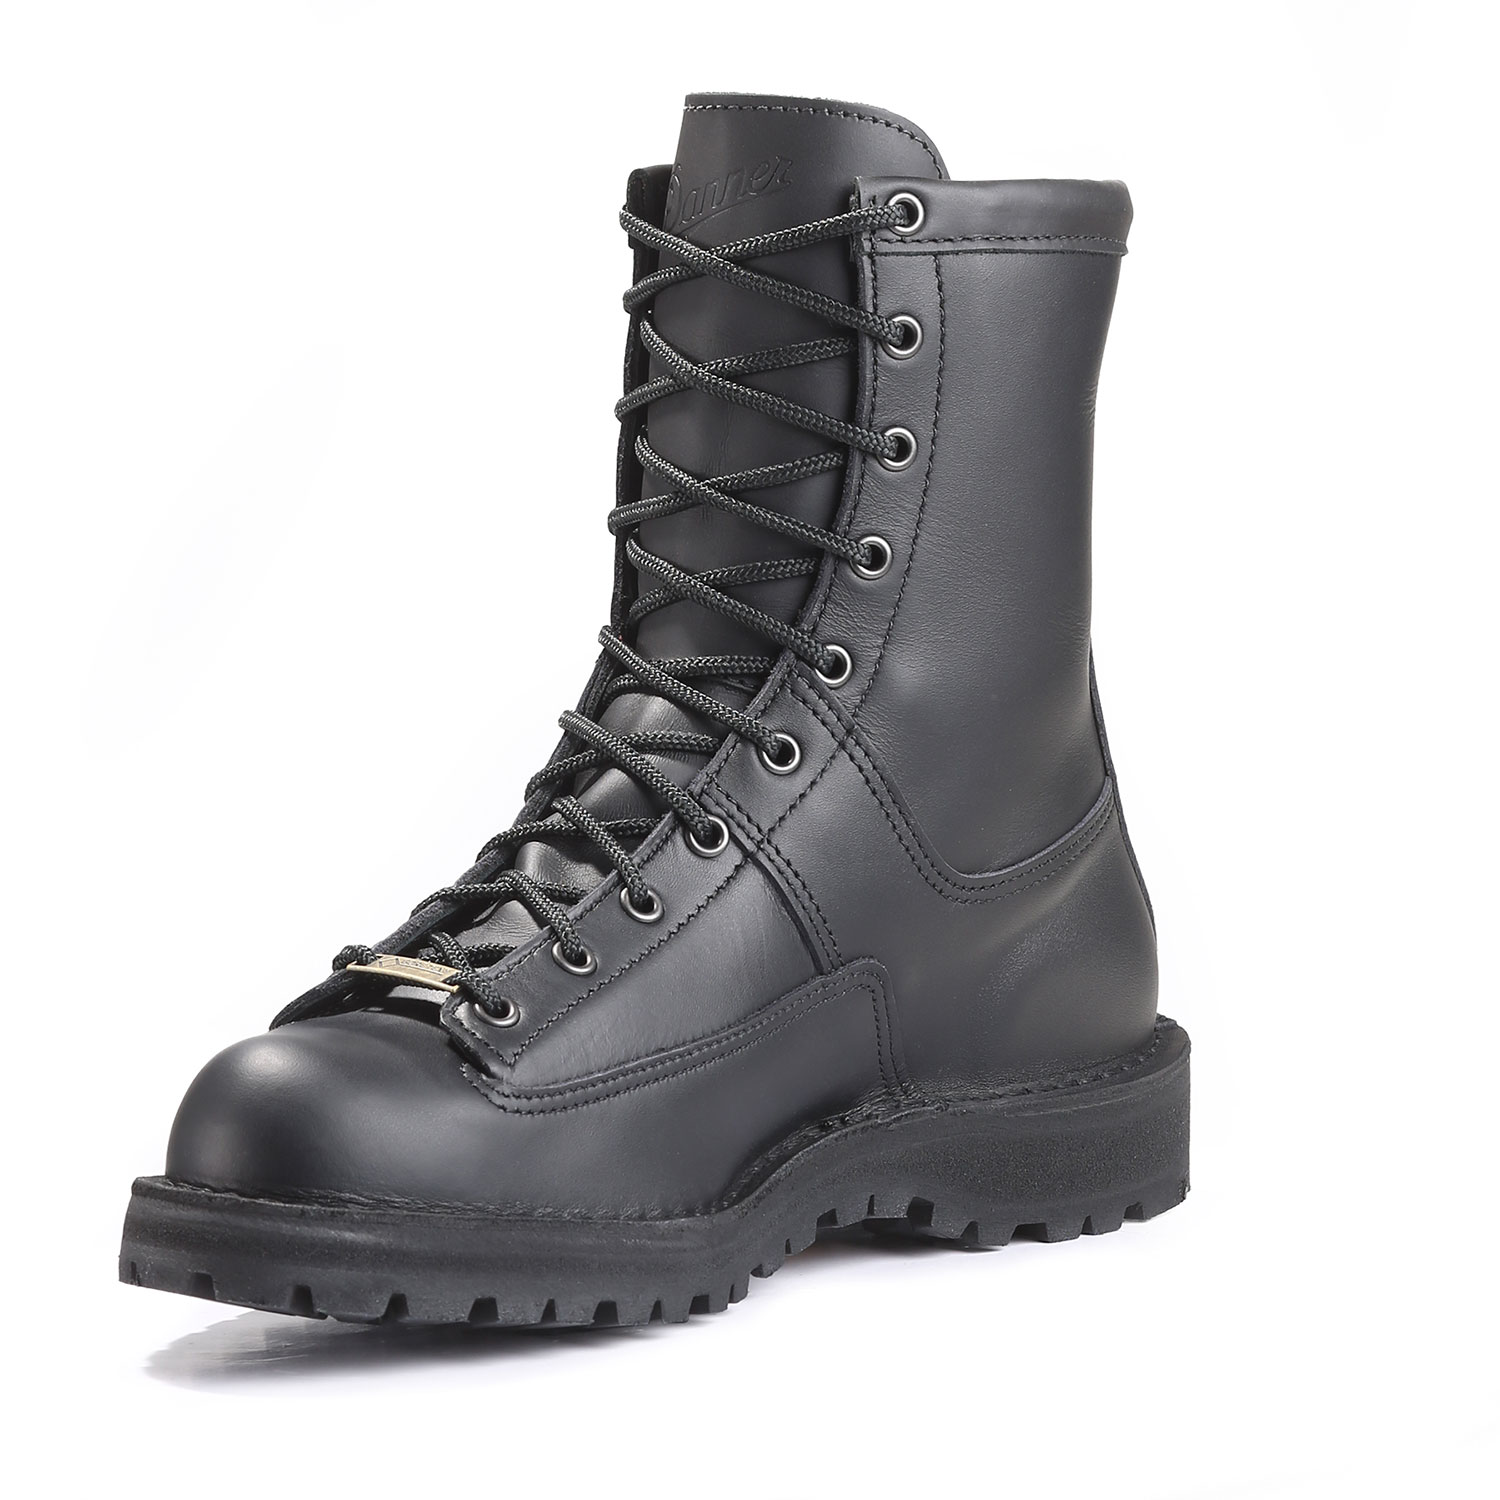 Danner 8" Recon Insulated Boot